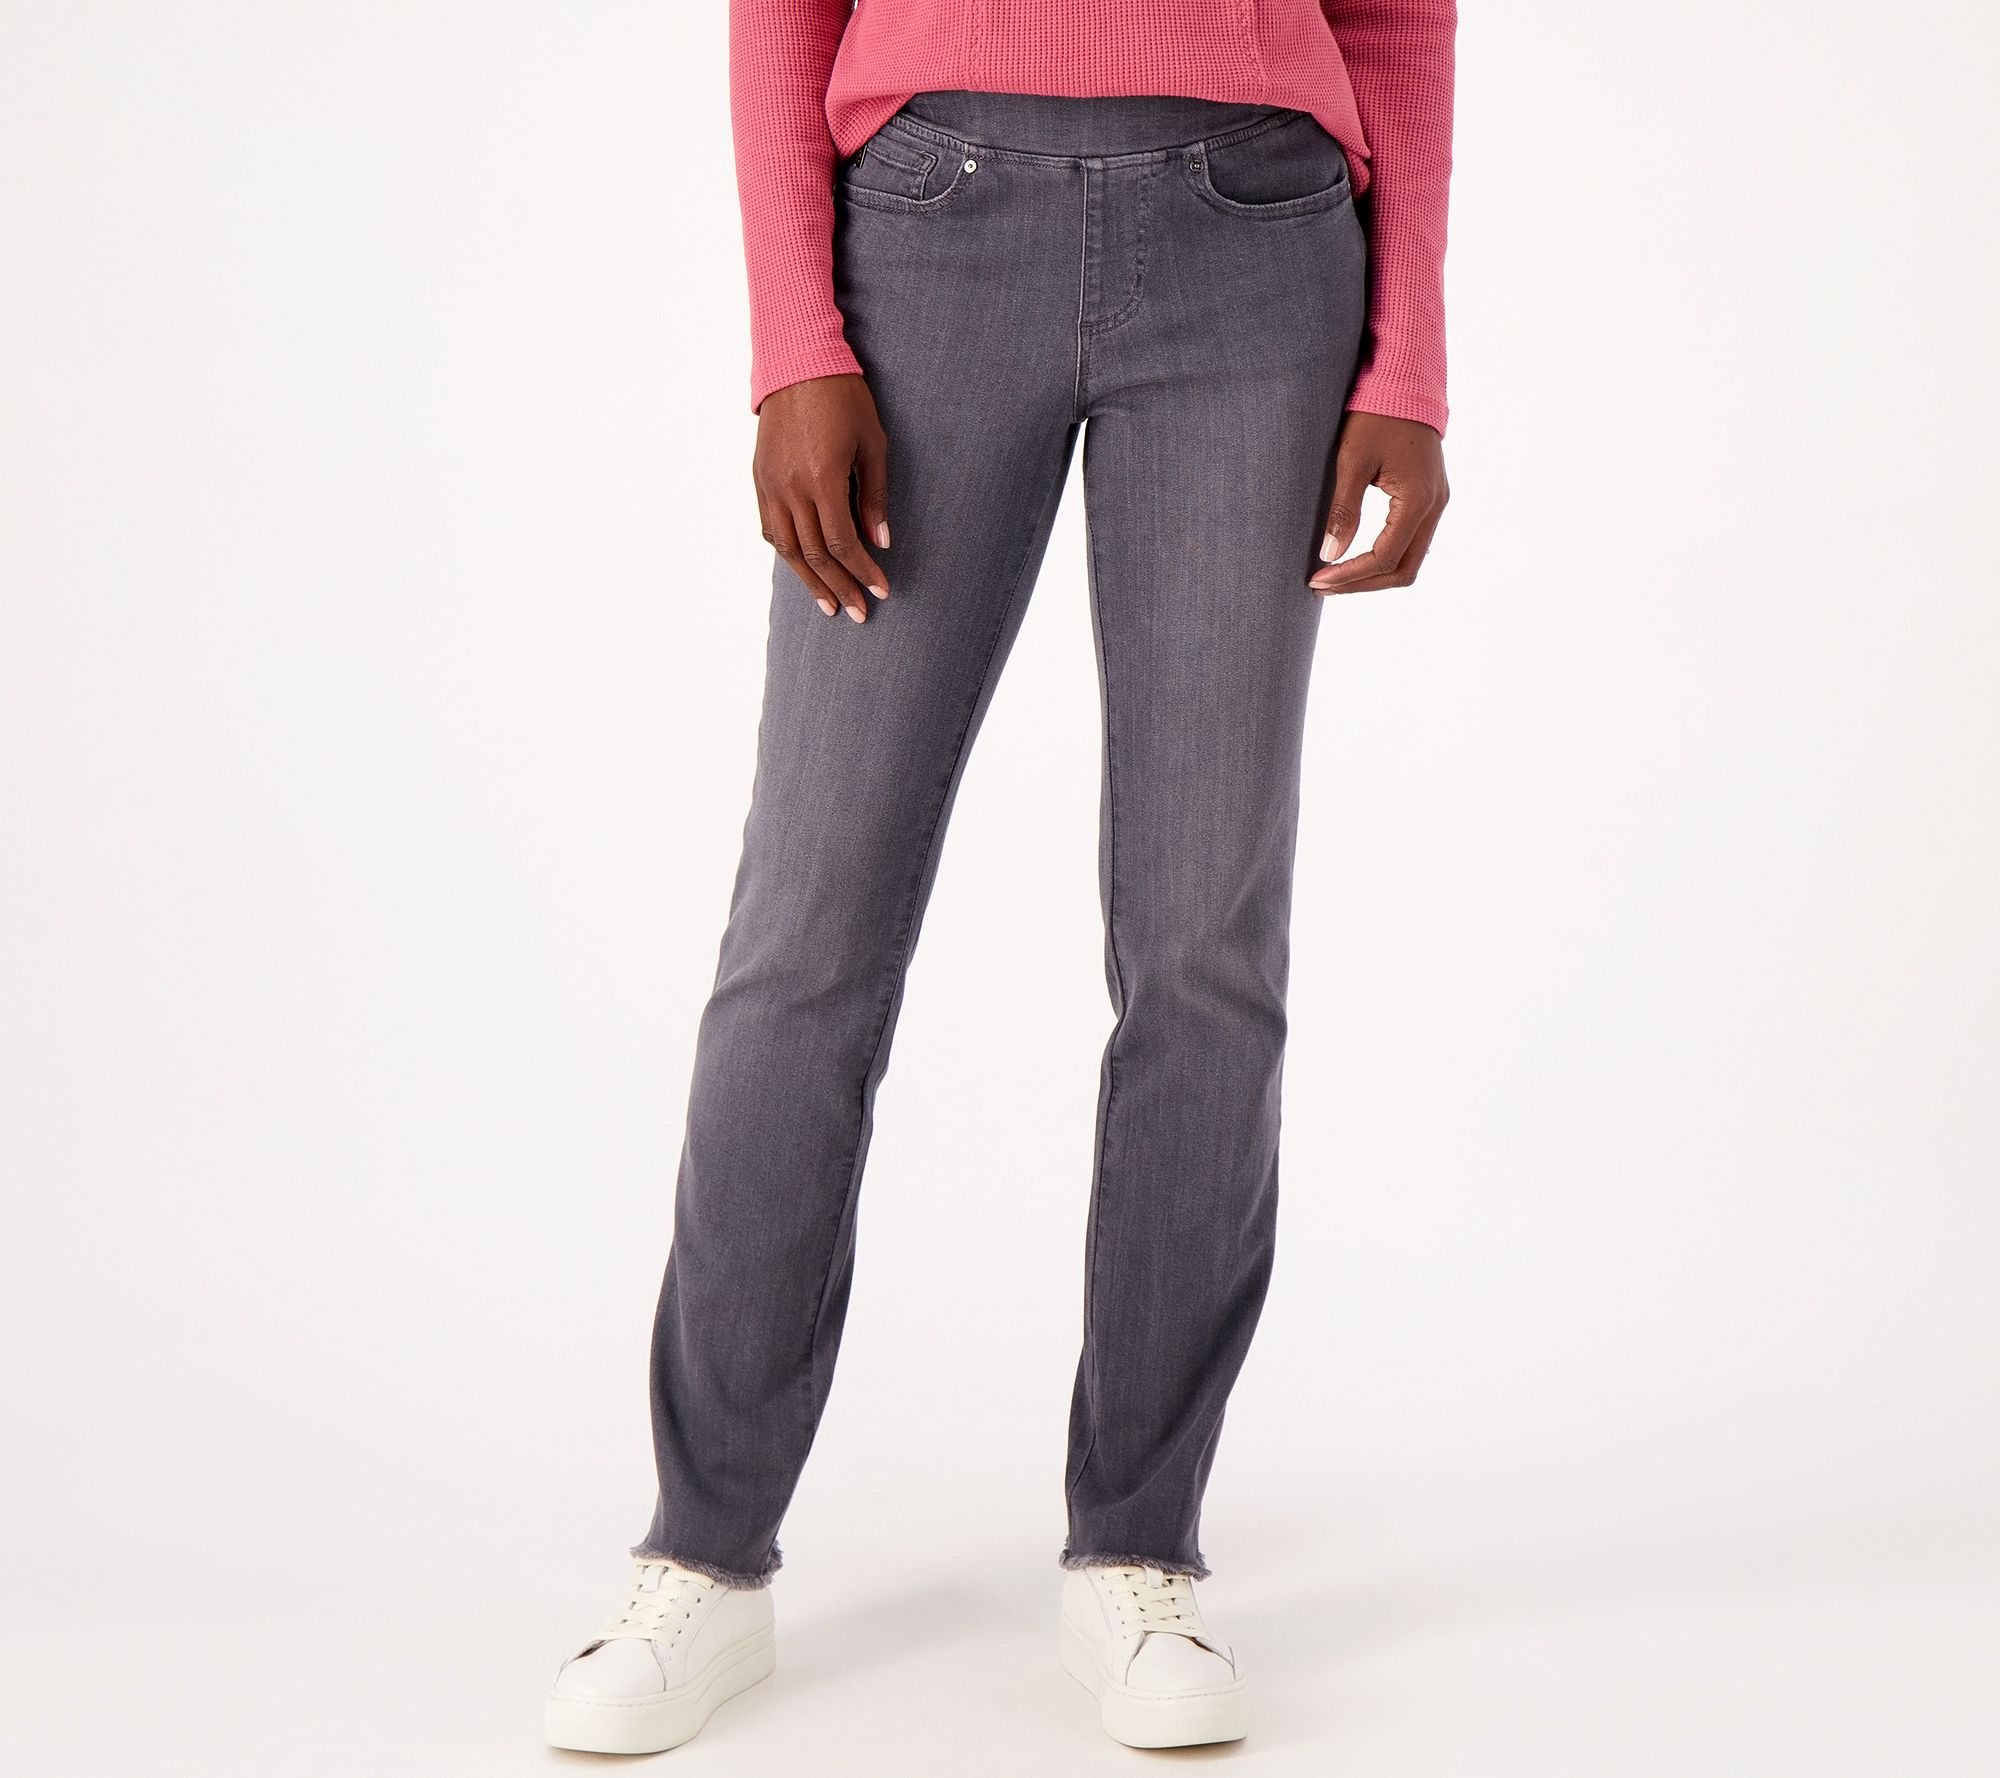 Belle by Kim Gravel Primabelle Jeans with Frayed Edge - QVC.com